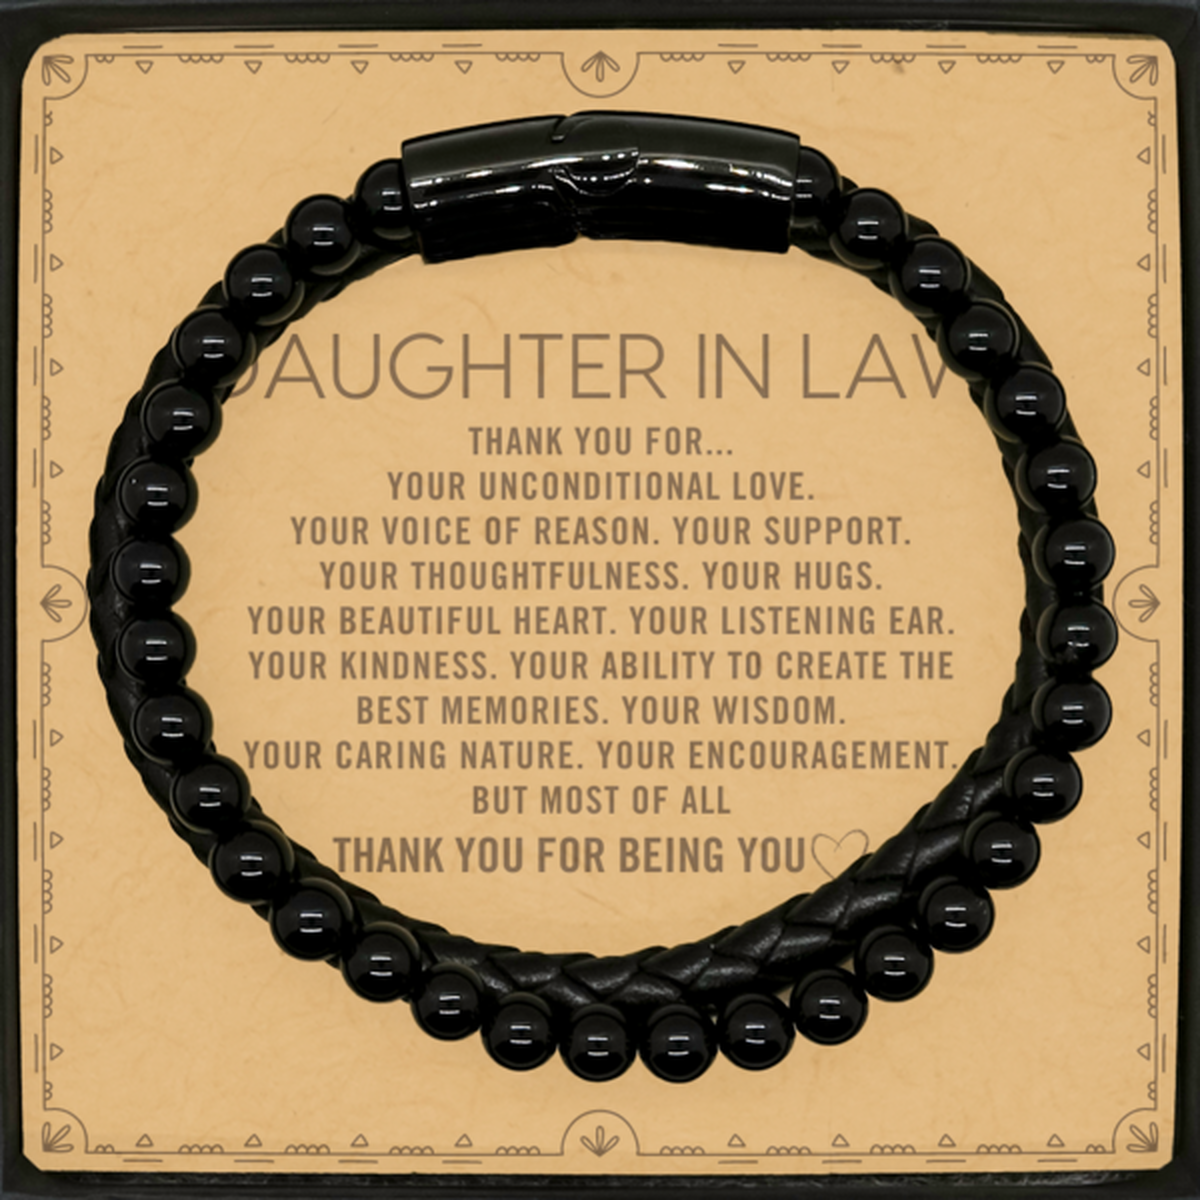 Daughter In Law Stone Leather Bracelets Custom, Message Card Gifts For Daughter In Law Christmas Graduation Birthday Gifts for Men Women Daughter In Law Thank you for Your unconditional love